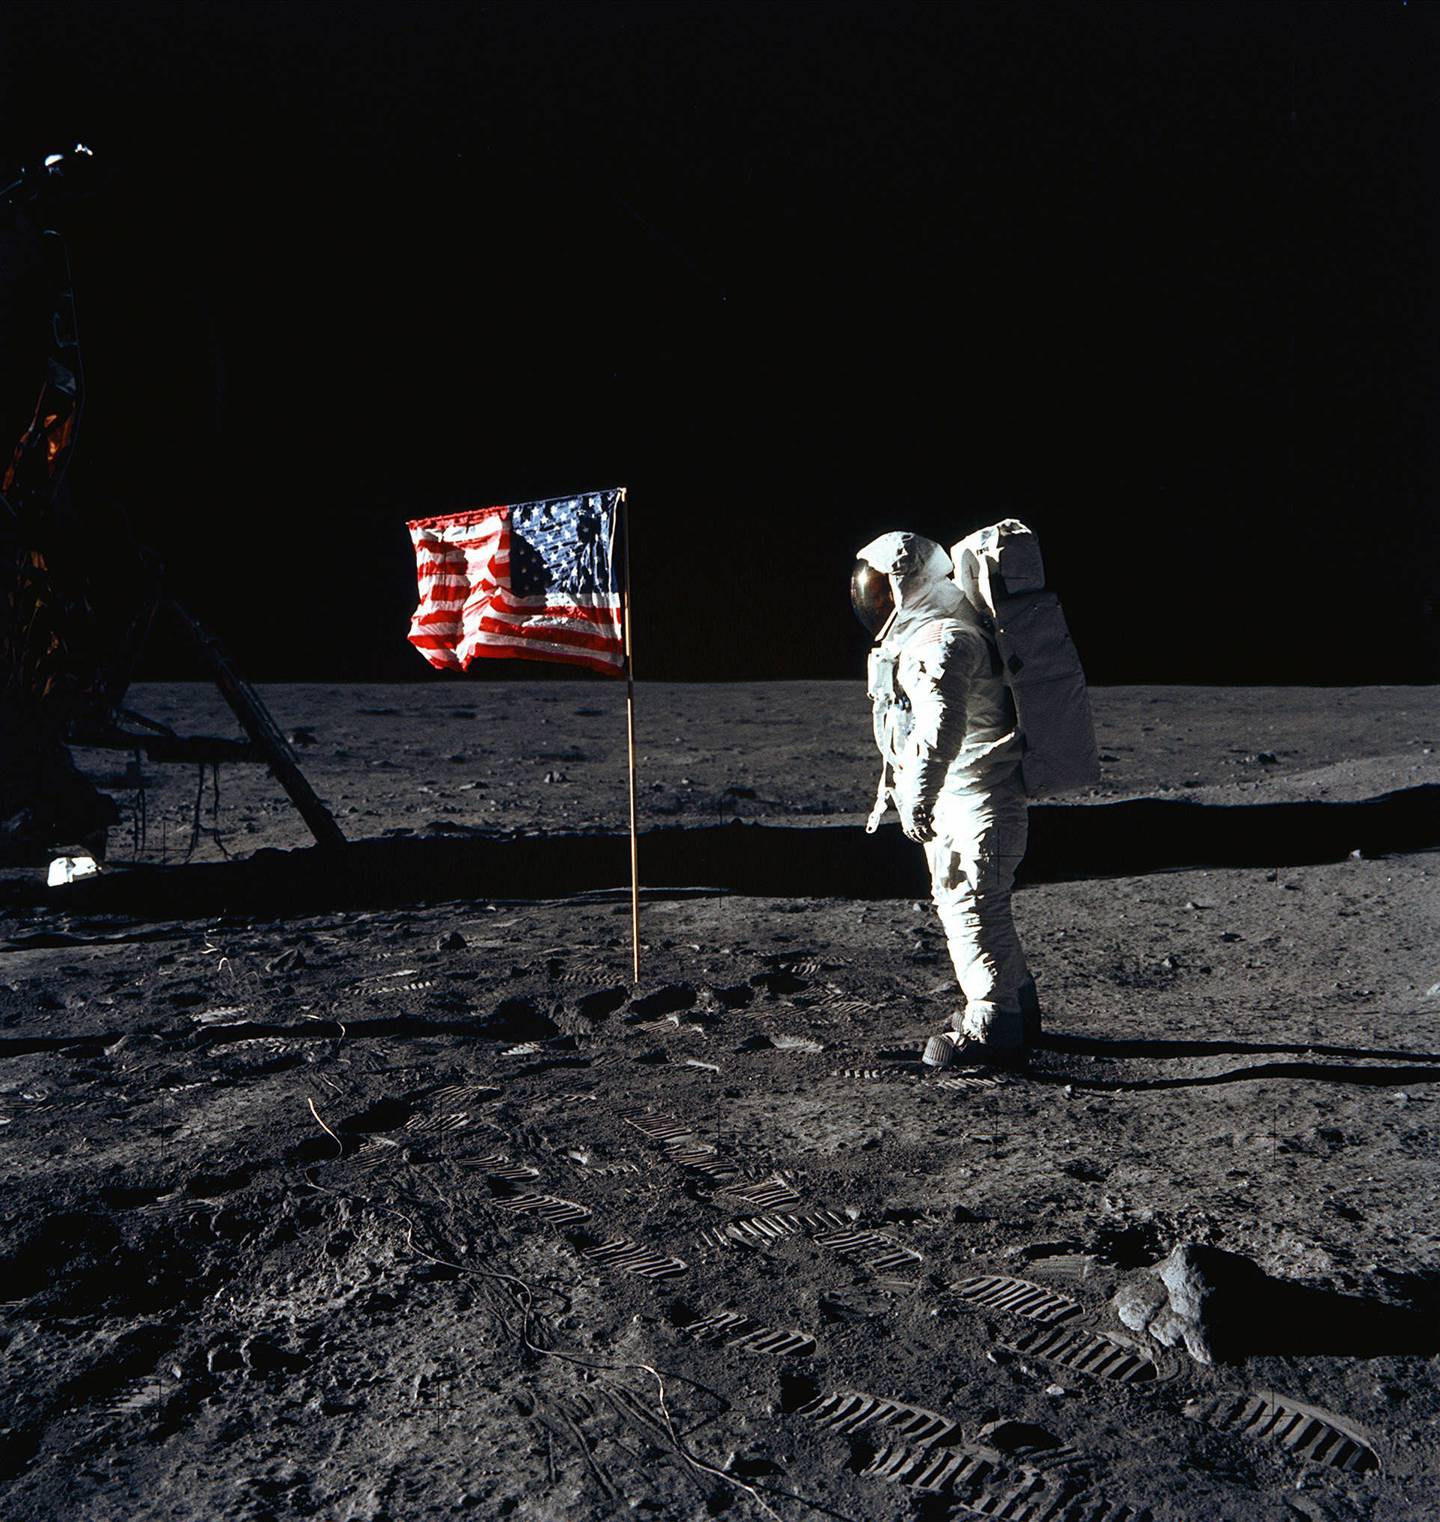 (FILES) This July 20, 1969 file photo shows US Astronaut Edwin E. Aldrin, Jr., lunar module pilot of the first lunar landing mission, as he poses for a photograph beside the deployed United States flag during Apollo 11 Extravehicular Activity (EVA) on the lunar surface area called the Sea of Tranquility. The Lunar Module (LM) is on the left, and the footprints of the astronauts are clearly visible in the soil of the Moon. On July 16, 1969, NASA astronauts Neil Armstrong, Buzz Aldrin and Michael Collins launched toward the moon atop a Saturn V rocket. Four days later, on July 20, Armstrong and Aldrin landed their Eagle lander at Tranquility Base on the moon as Collins remained in orbit aboard the command module. The 45 year anniversary of the landing will be marked on July 20, 2014.  AFP PHOTO / NASA/HANDOUT  = RESTRICTED TO EDITORIAL USE - MANDATORY CREDIT "AFP PHOTO / NASA / HANDOUT" - NO MARKETING NO ADVERTISING CAMPAIGNS - NO A LA CARTE SALES/DISTRIBUTED AS A SERVICE TO CLIENTS =